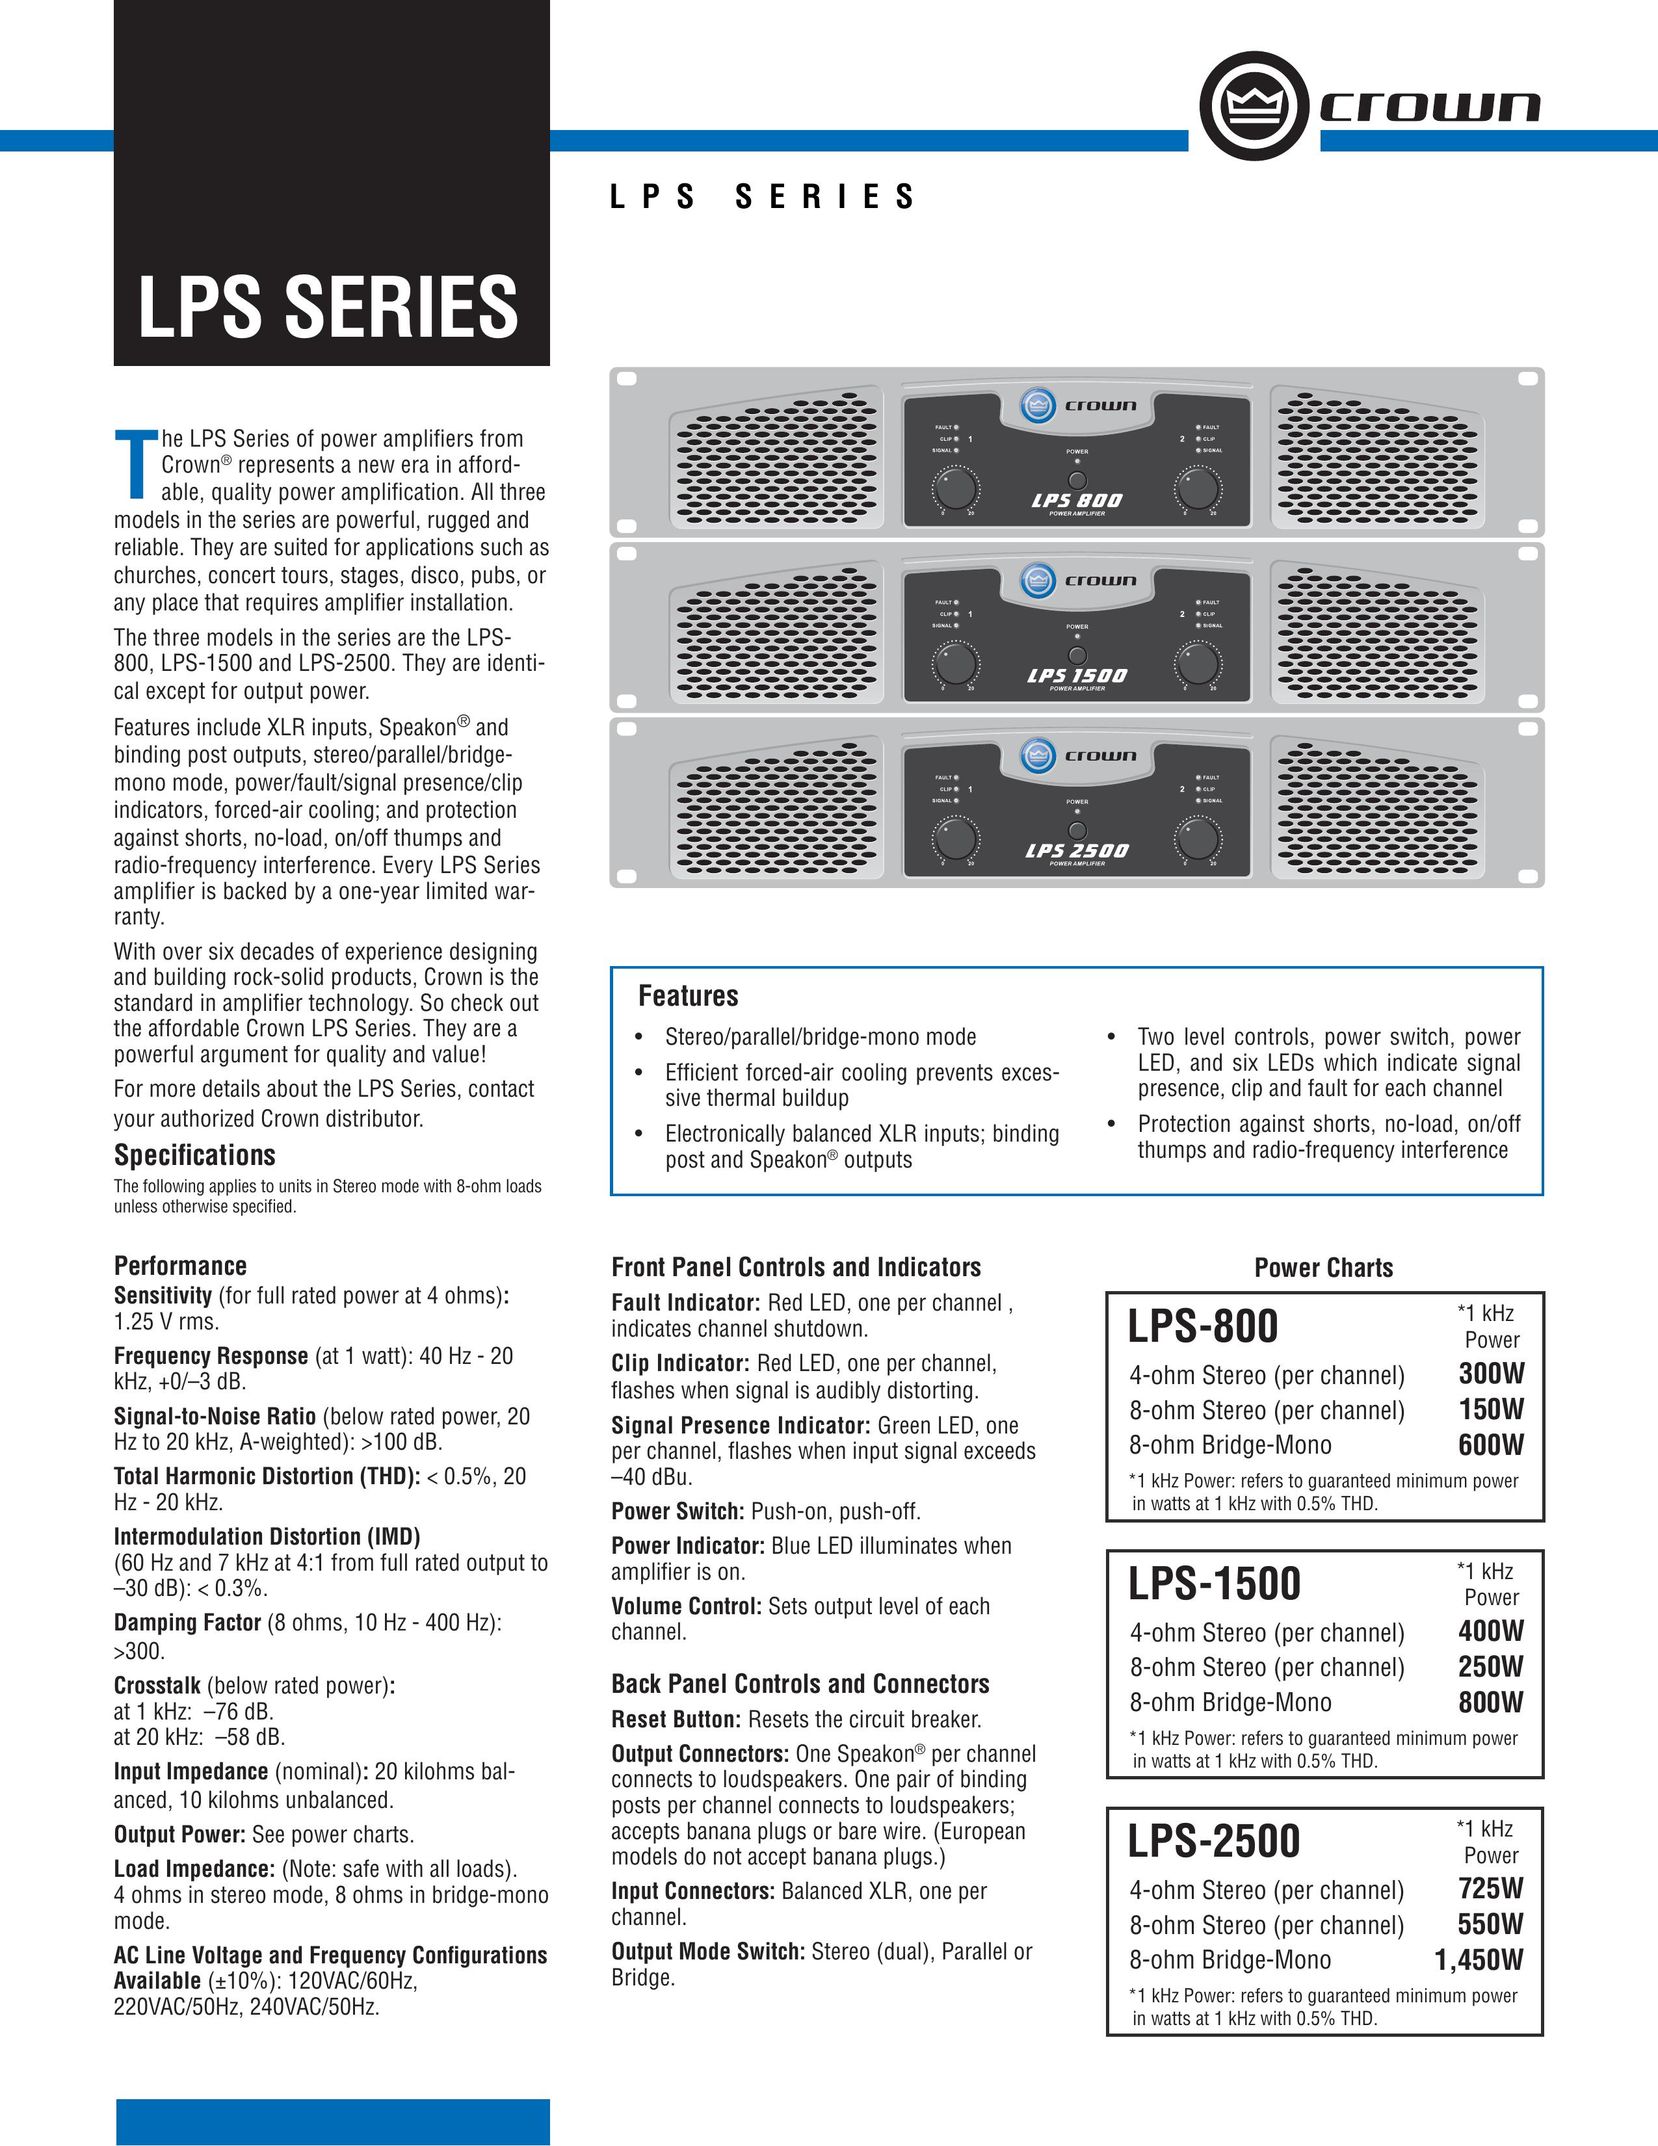 Crown LPS-800 Stereo Amplifier User Manual